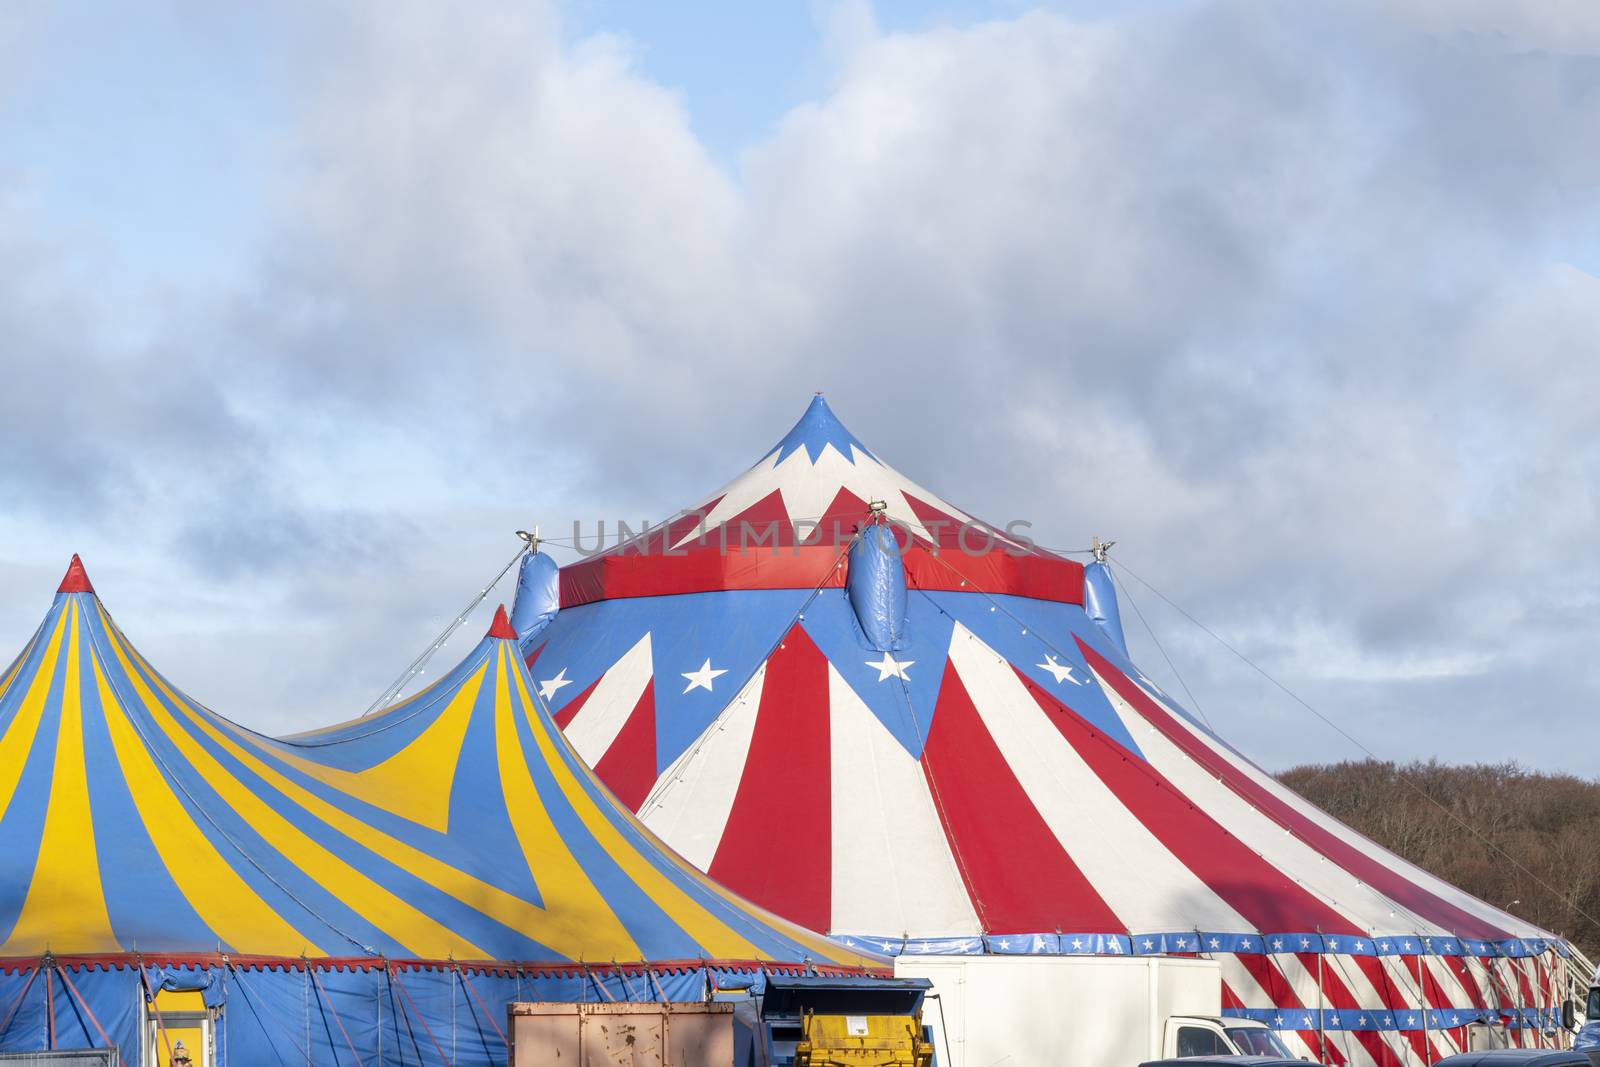 Red and white circus tent topped with bleu starred cover against a sunny blue sky with clouds by ankorlight